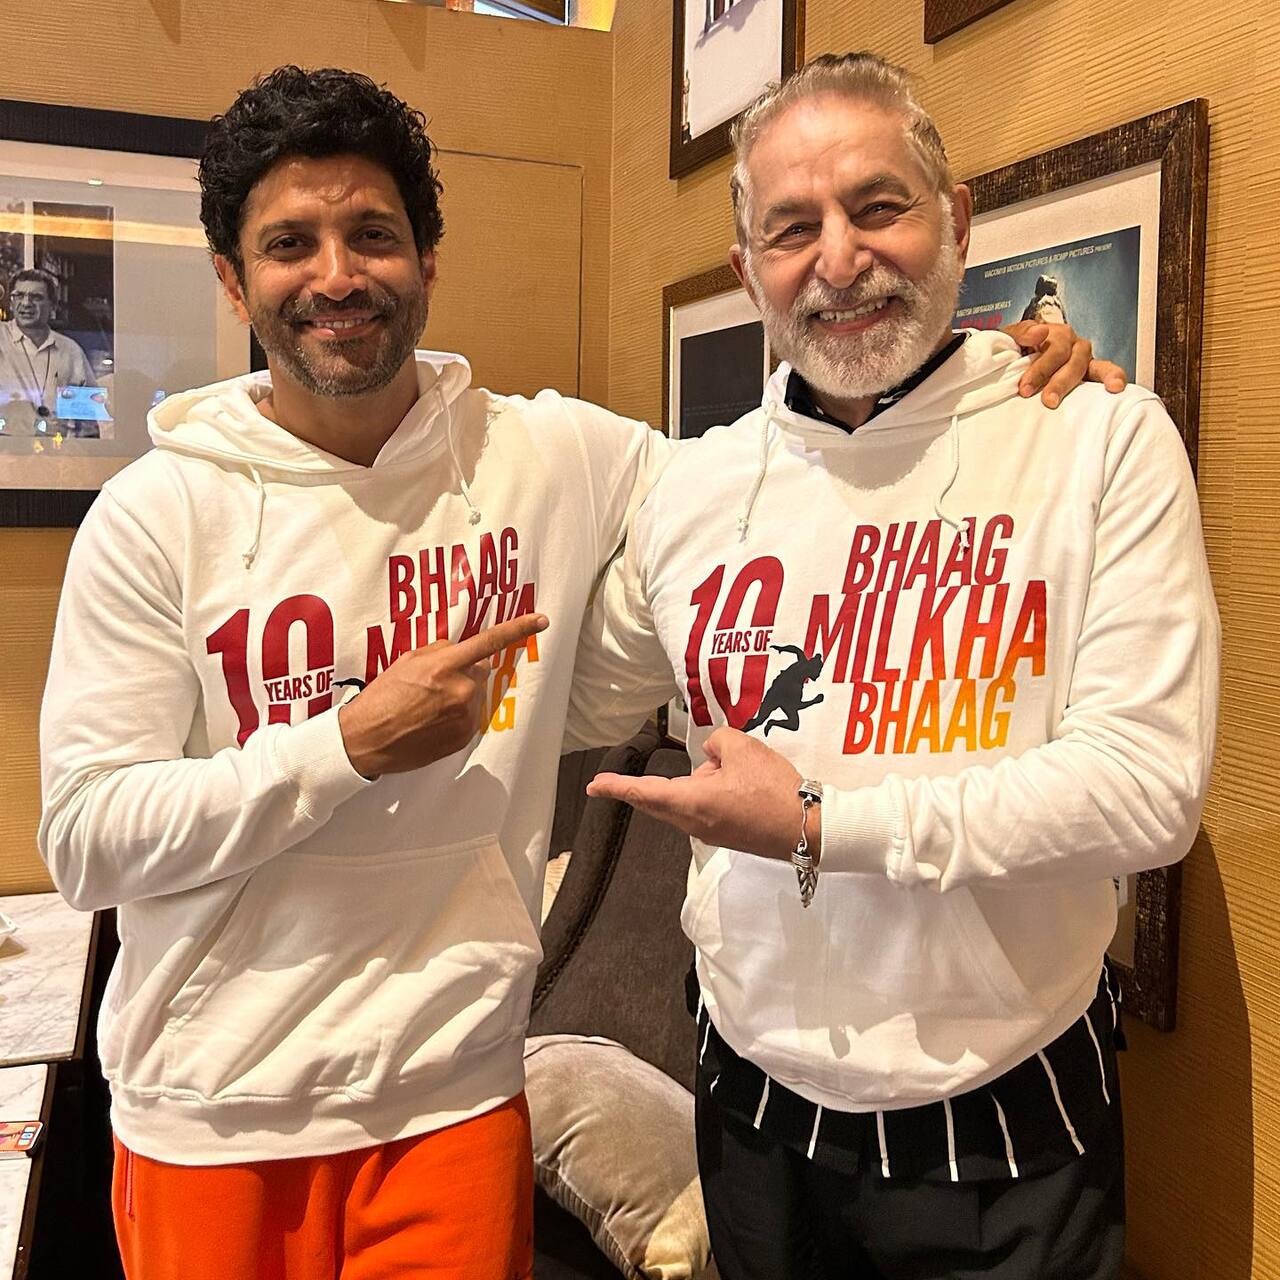 Dalip Tahil also posts pictures with others in the film and entertainment fraternity. He posted a fanboy moment with Farhan Akhtar and credited him with bringing the 'aag' in 'Bhaag Milkha Bhaag'